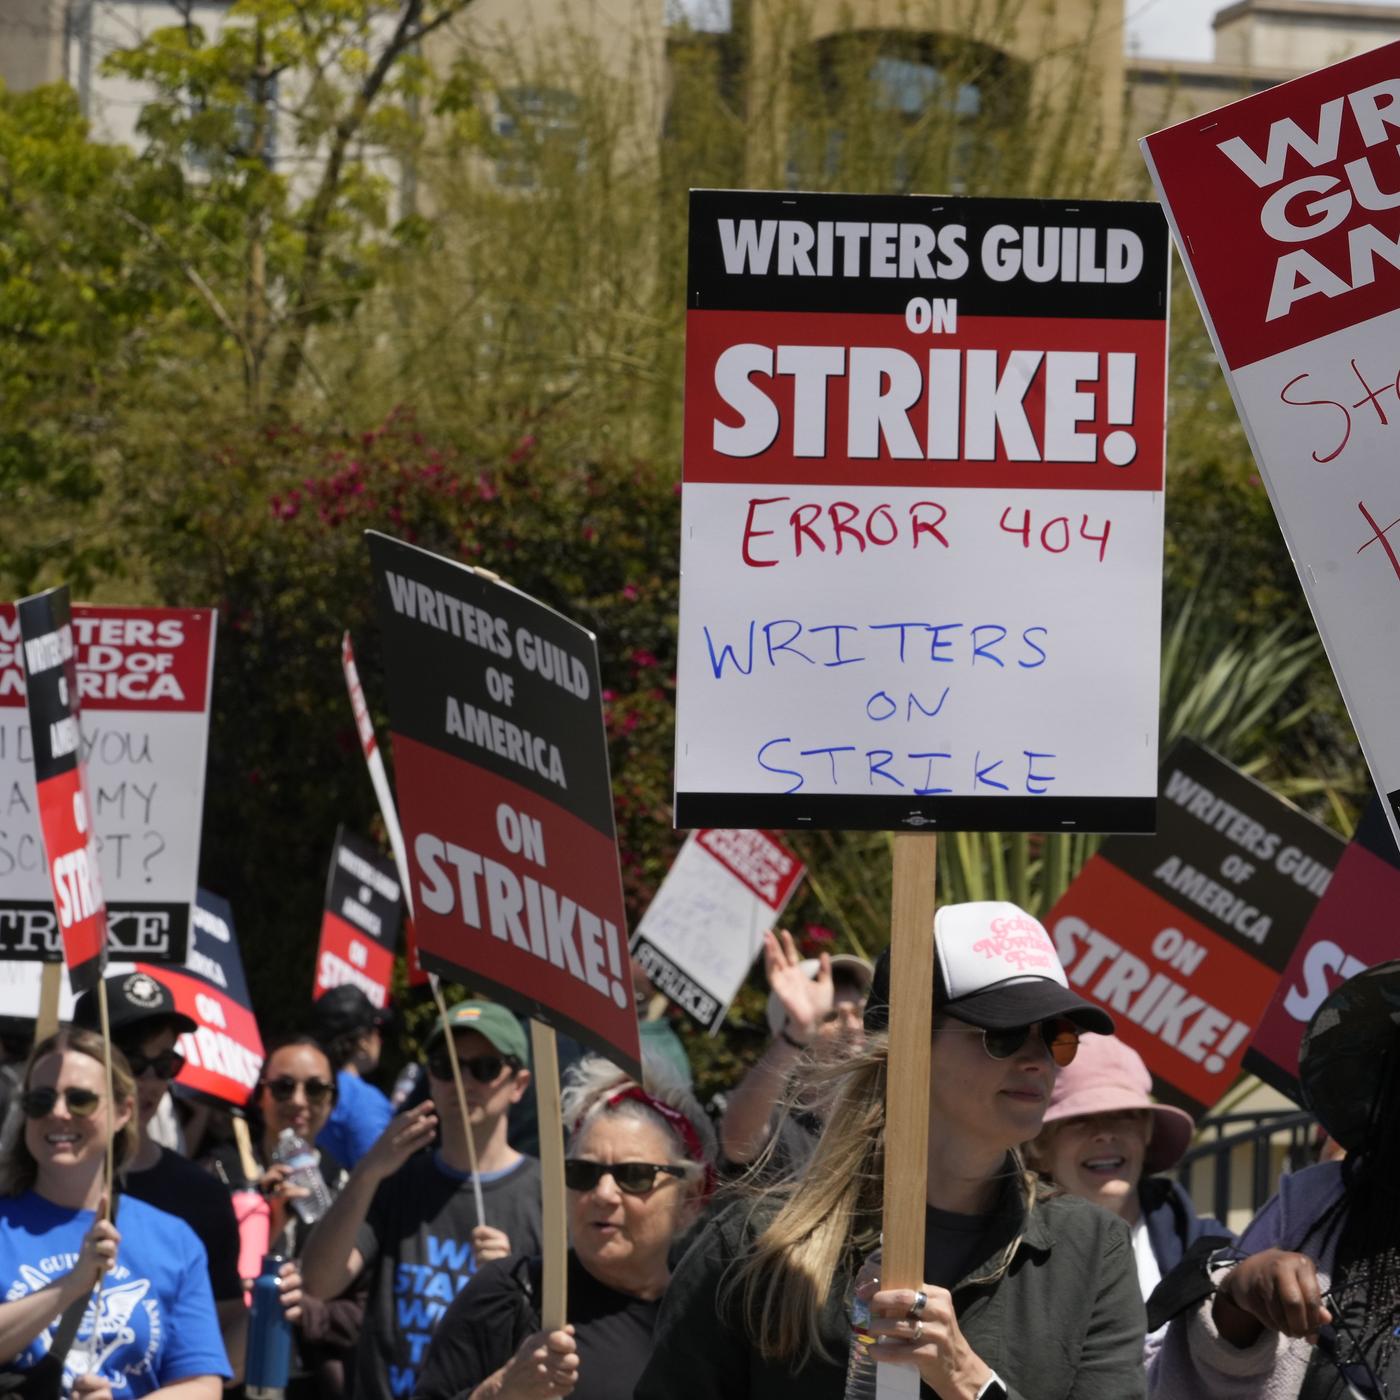 Debunking Myths About the Writers' Strike